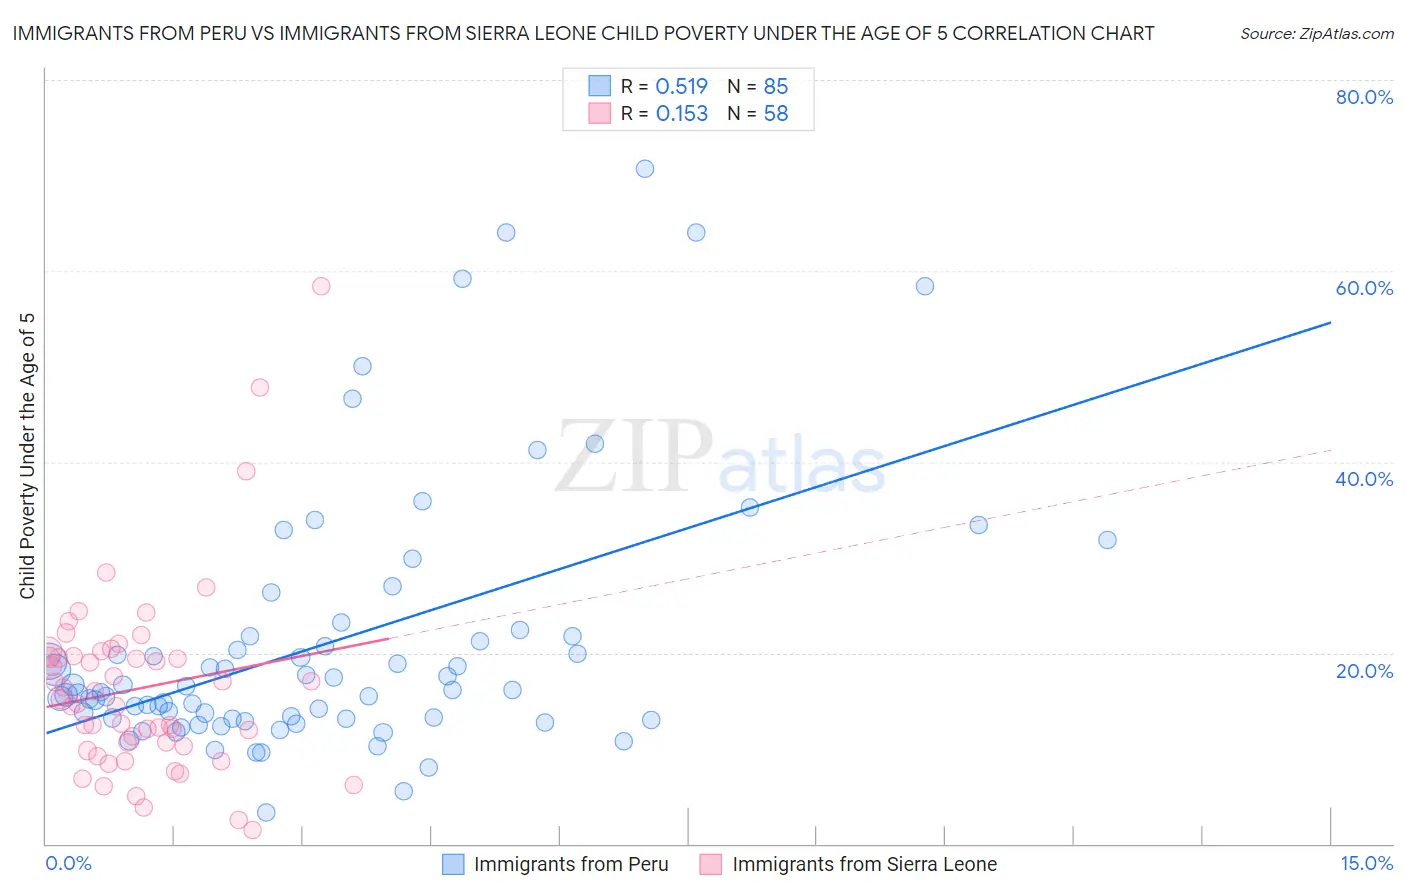 Immigrants from Peru vs Immigrants from Sierra Leone Child Poverty Under the Age of 5